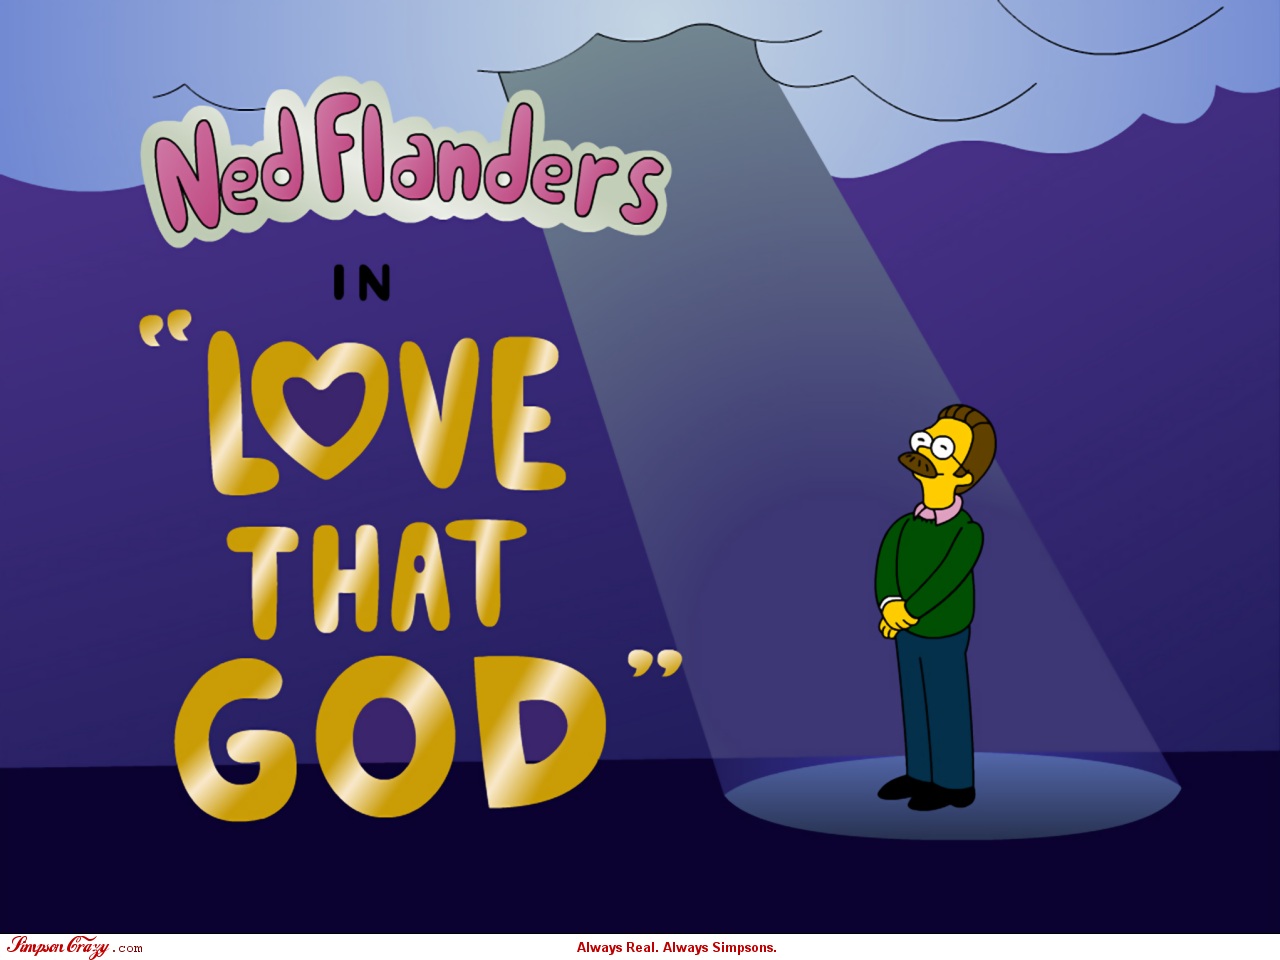 tv show, ned flanders, the simpsons